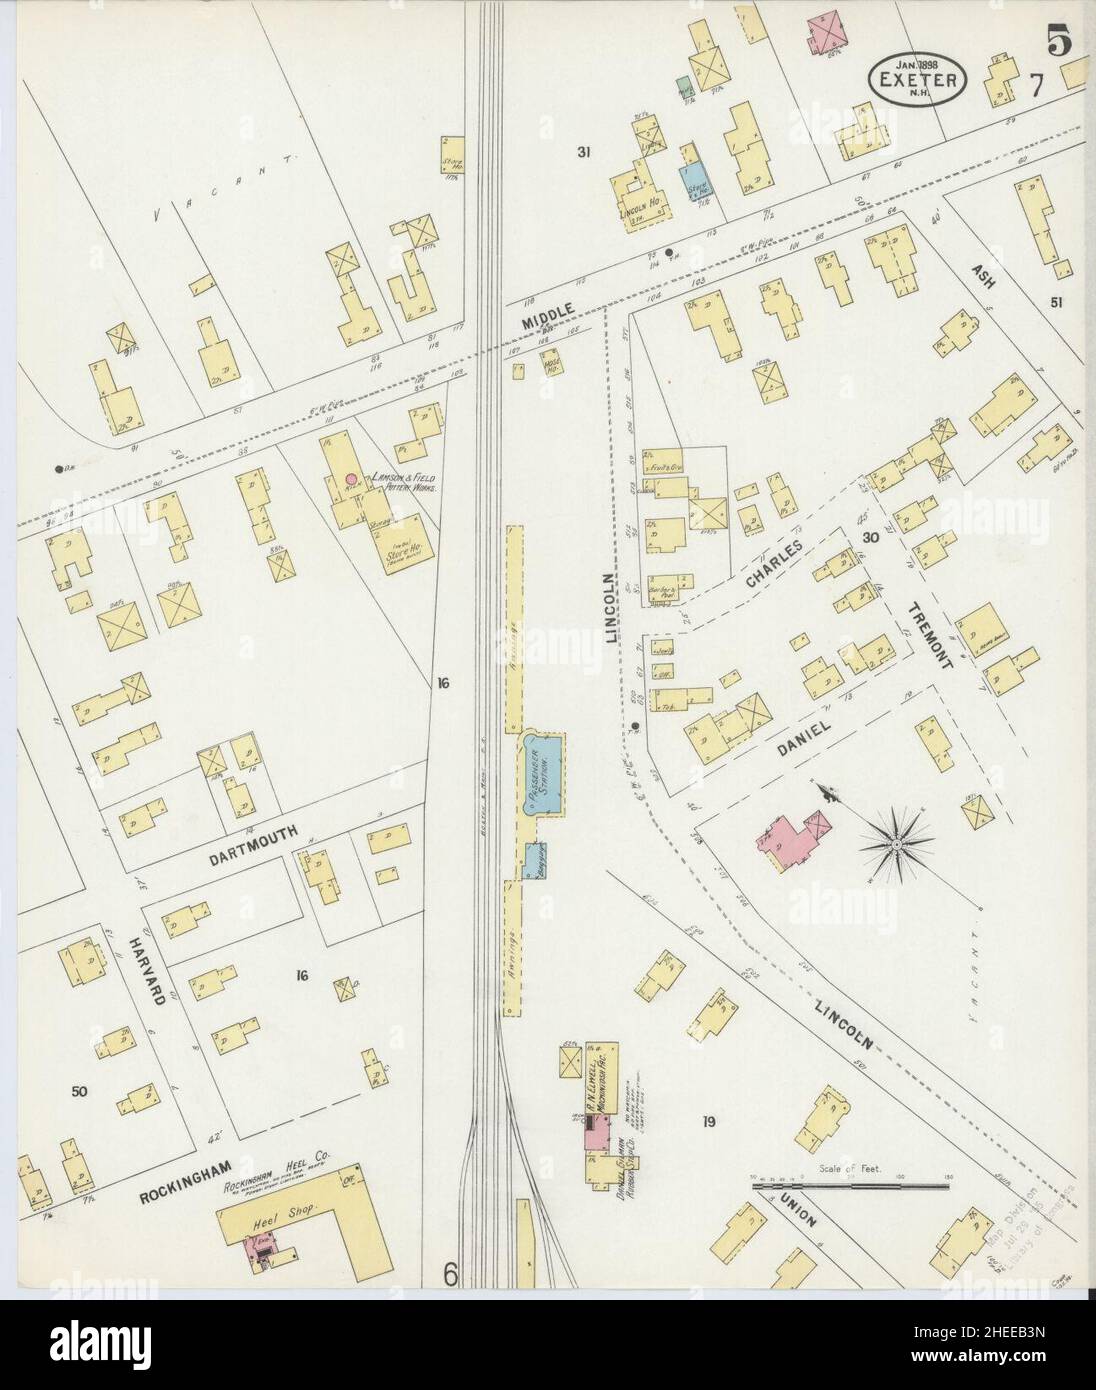 Sanborn Fire Insurance Map from Exeter, Rockingham County, New Hampshire. Stock Photo